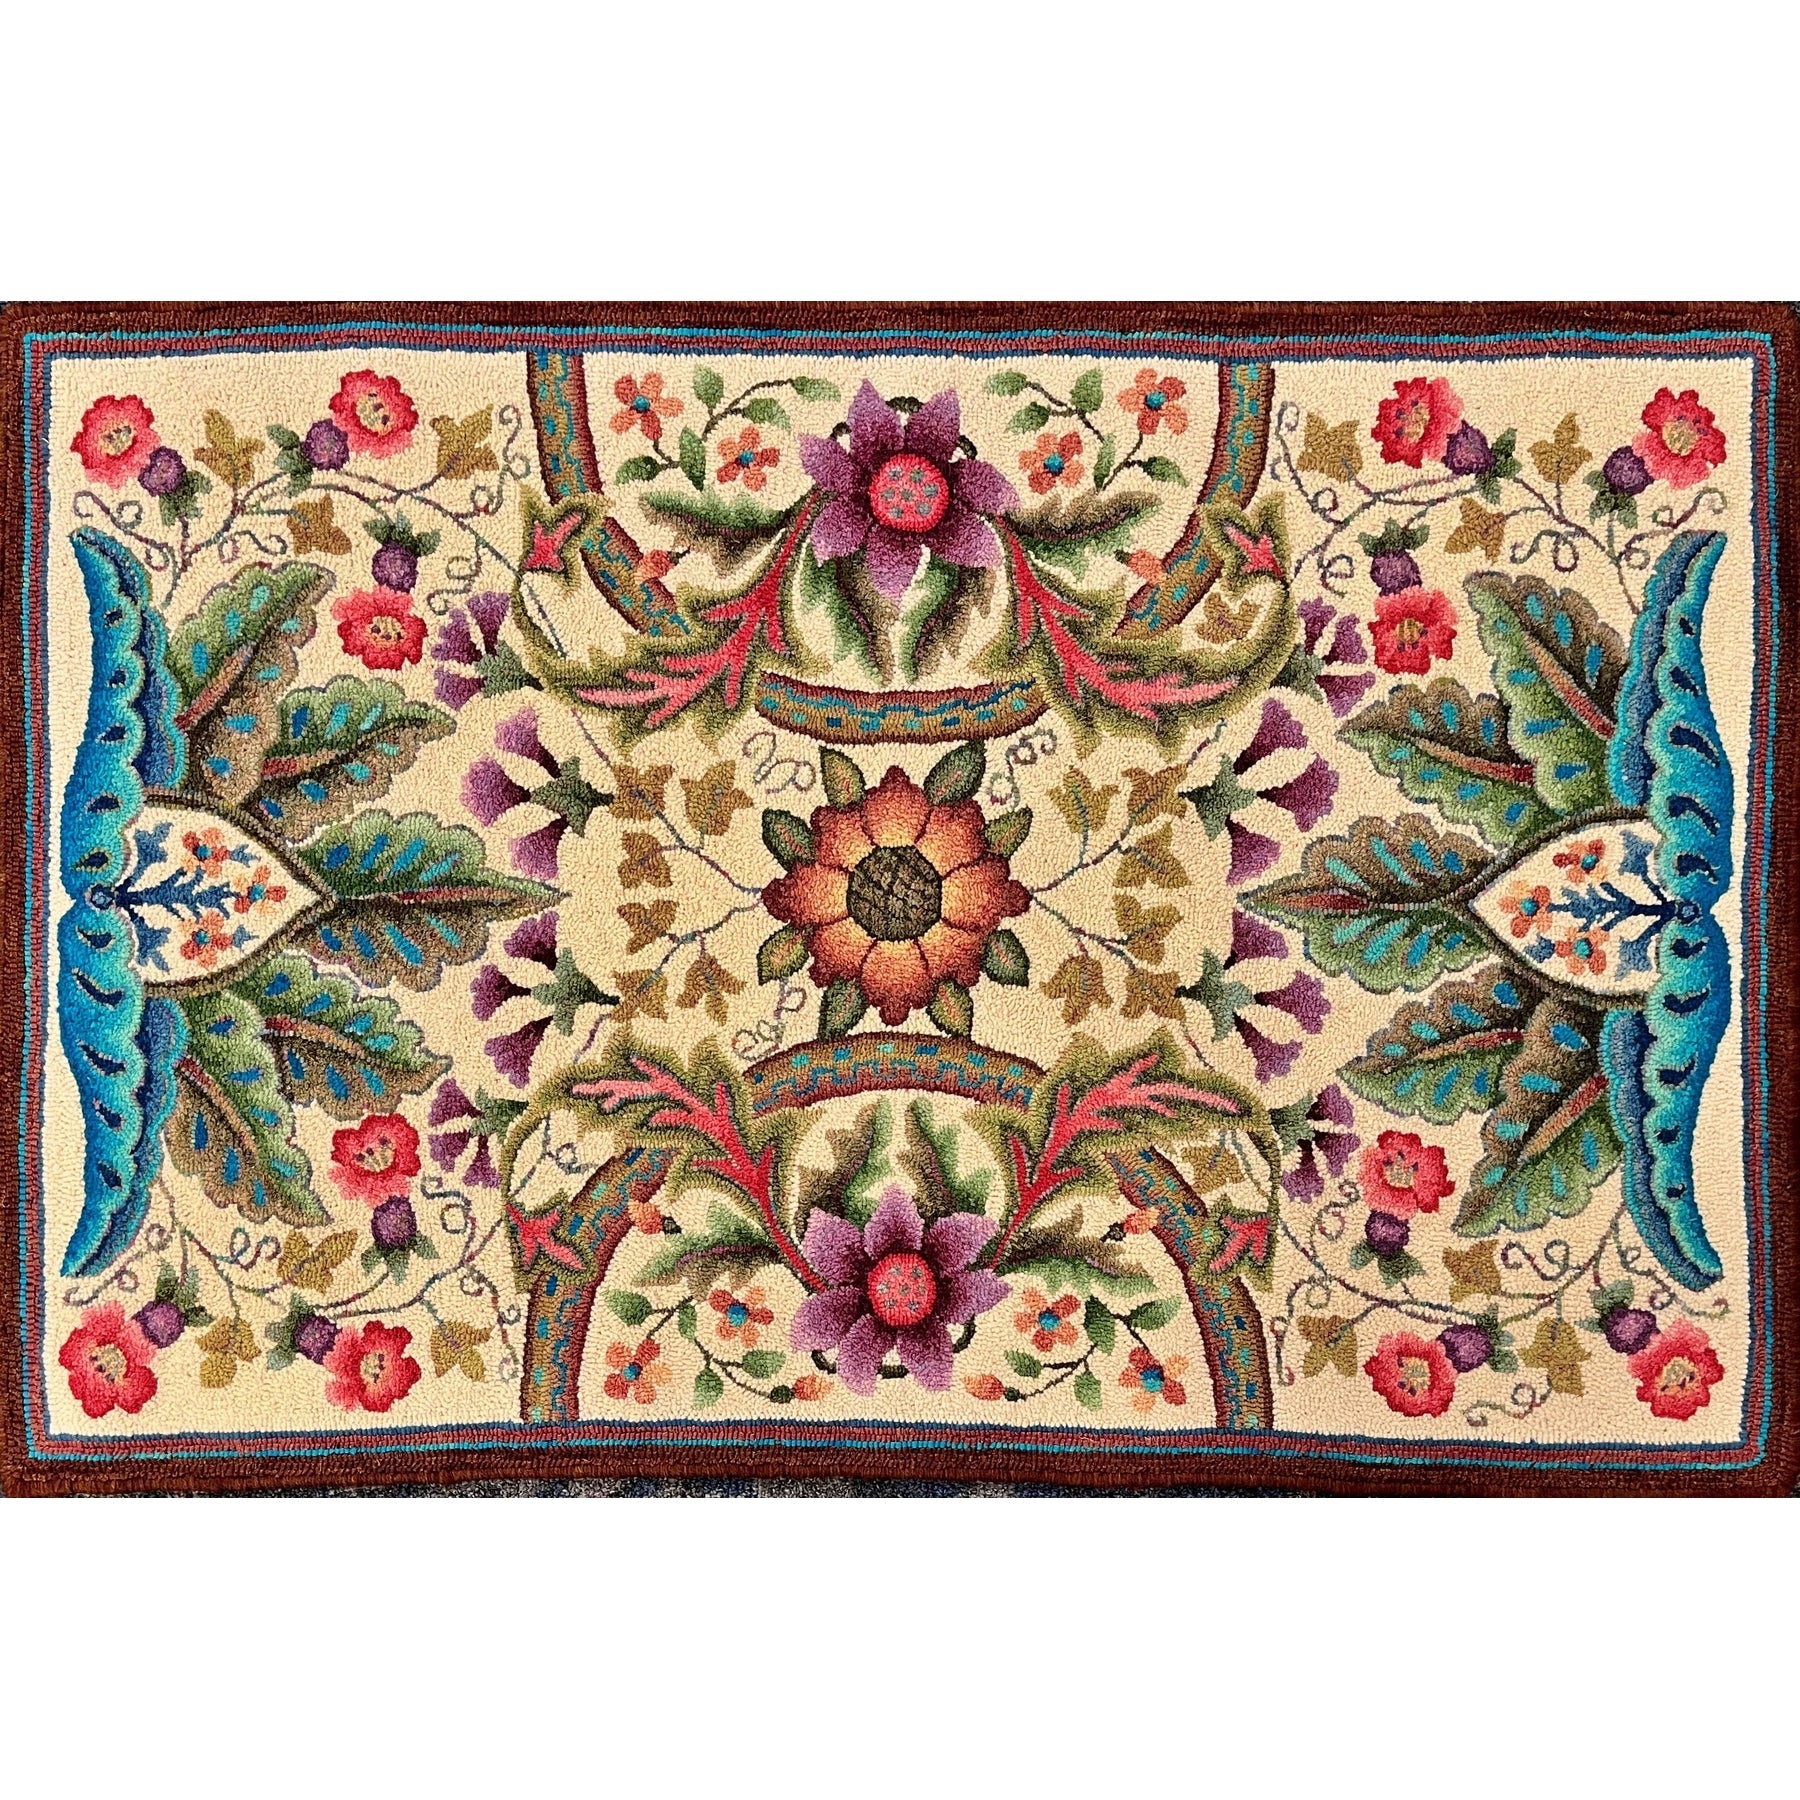 Morris Victorian, rug hooked by Vivily Powers